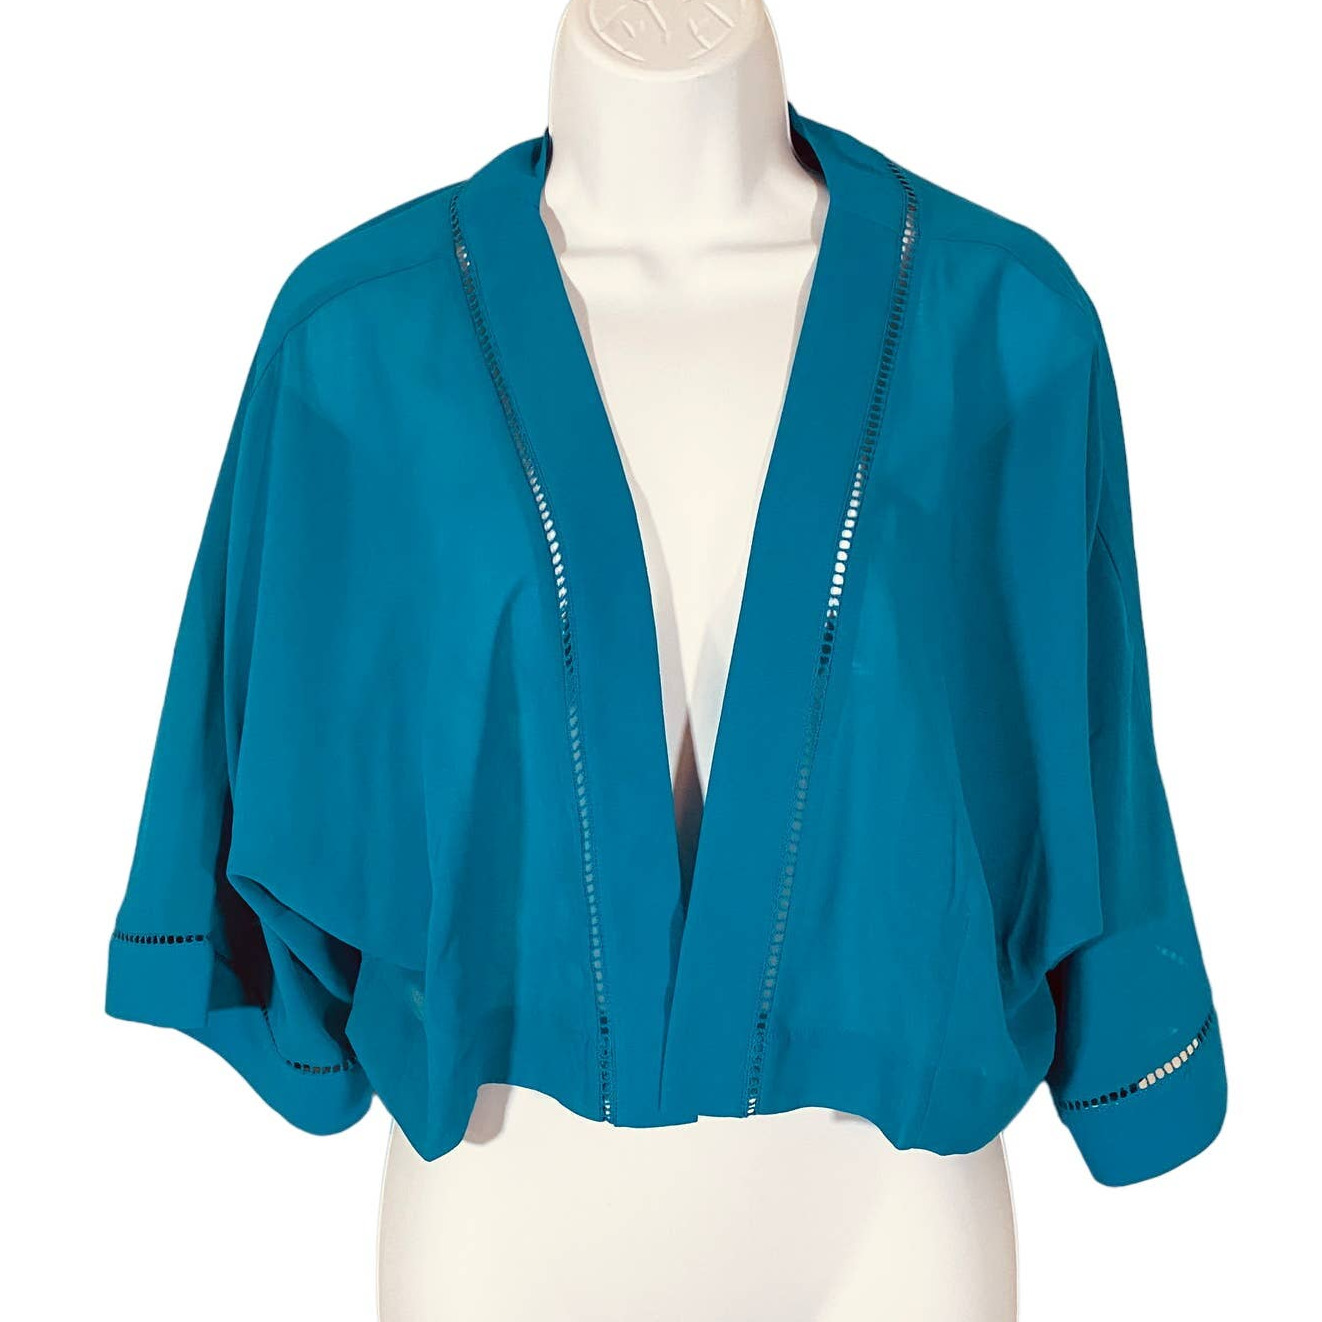 Soft Surroundings NWT Teal Blue Cati Topper Bolero Jacket Lightweight Cover Up M